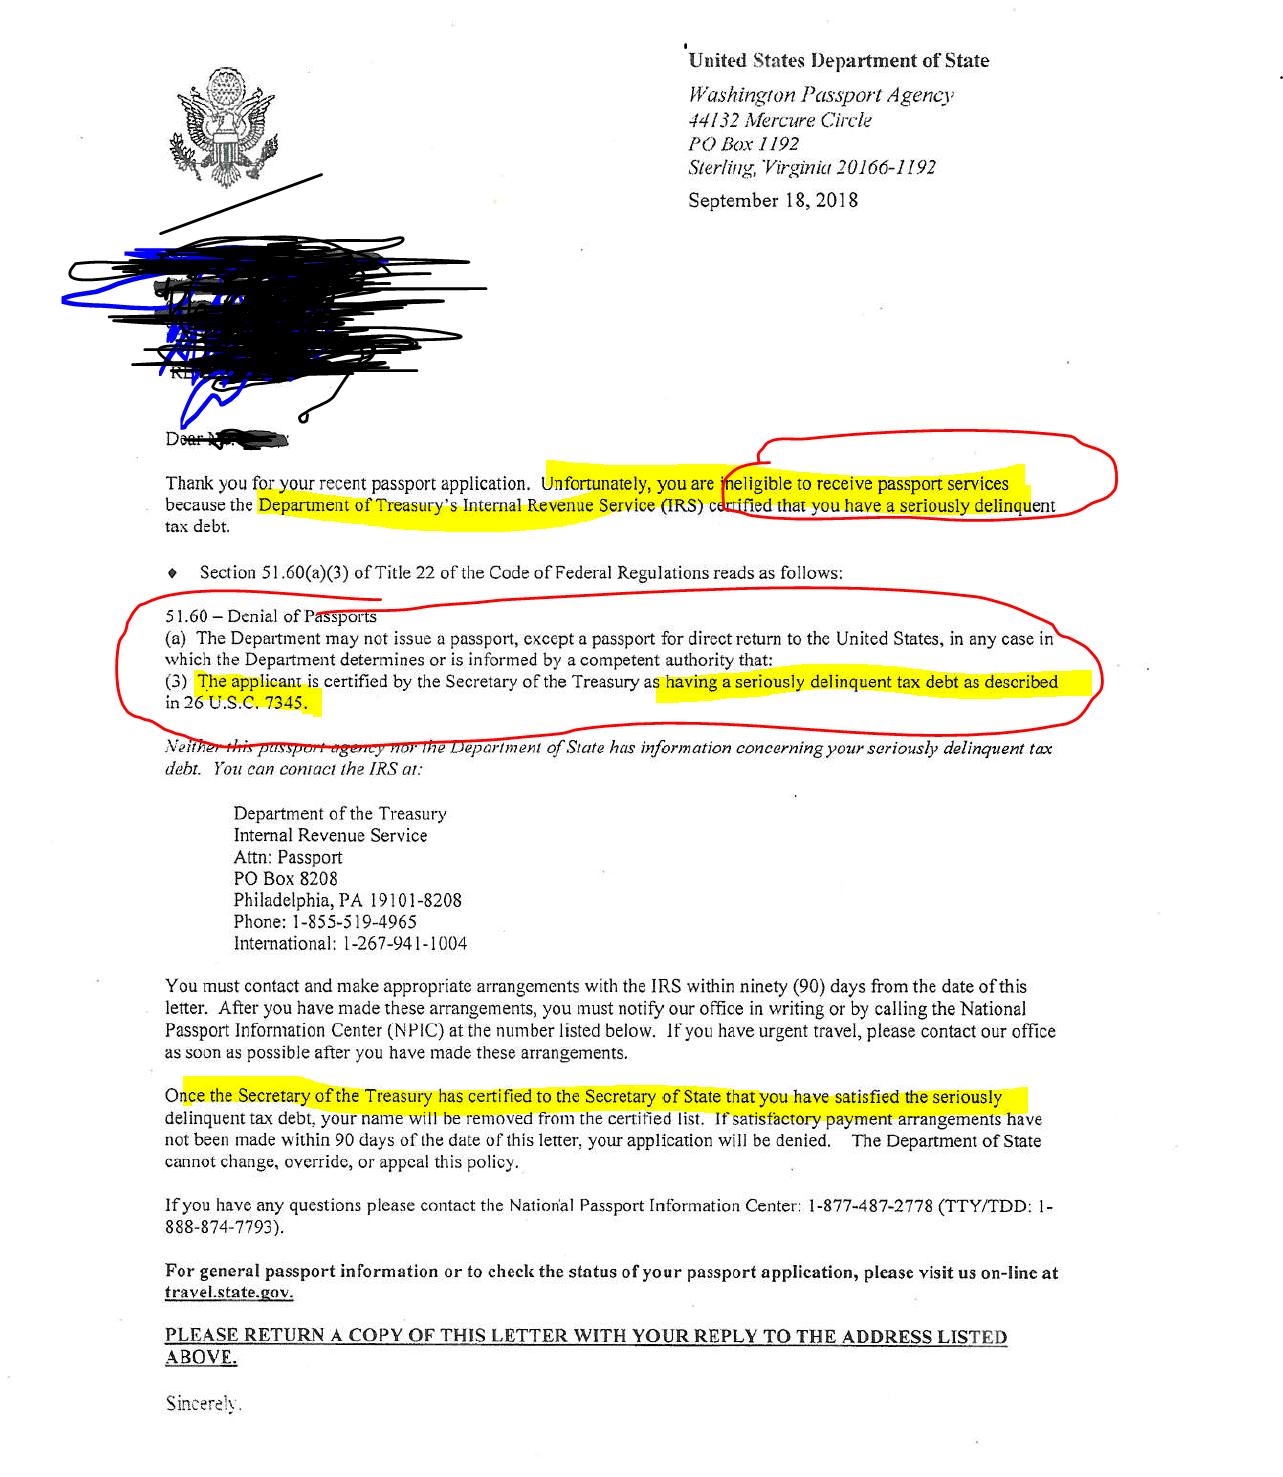 Sample letter from Department of State re Revocation of Passports - Seriosly Delinquent Tax Debt.PNG